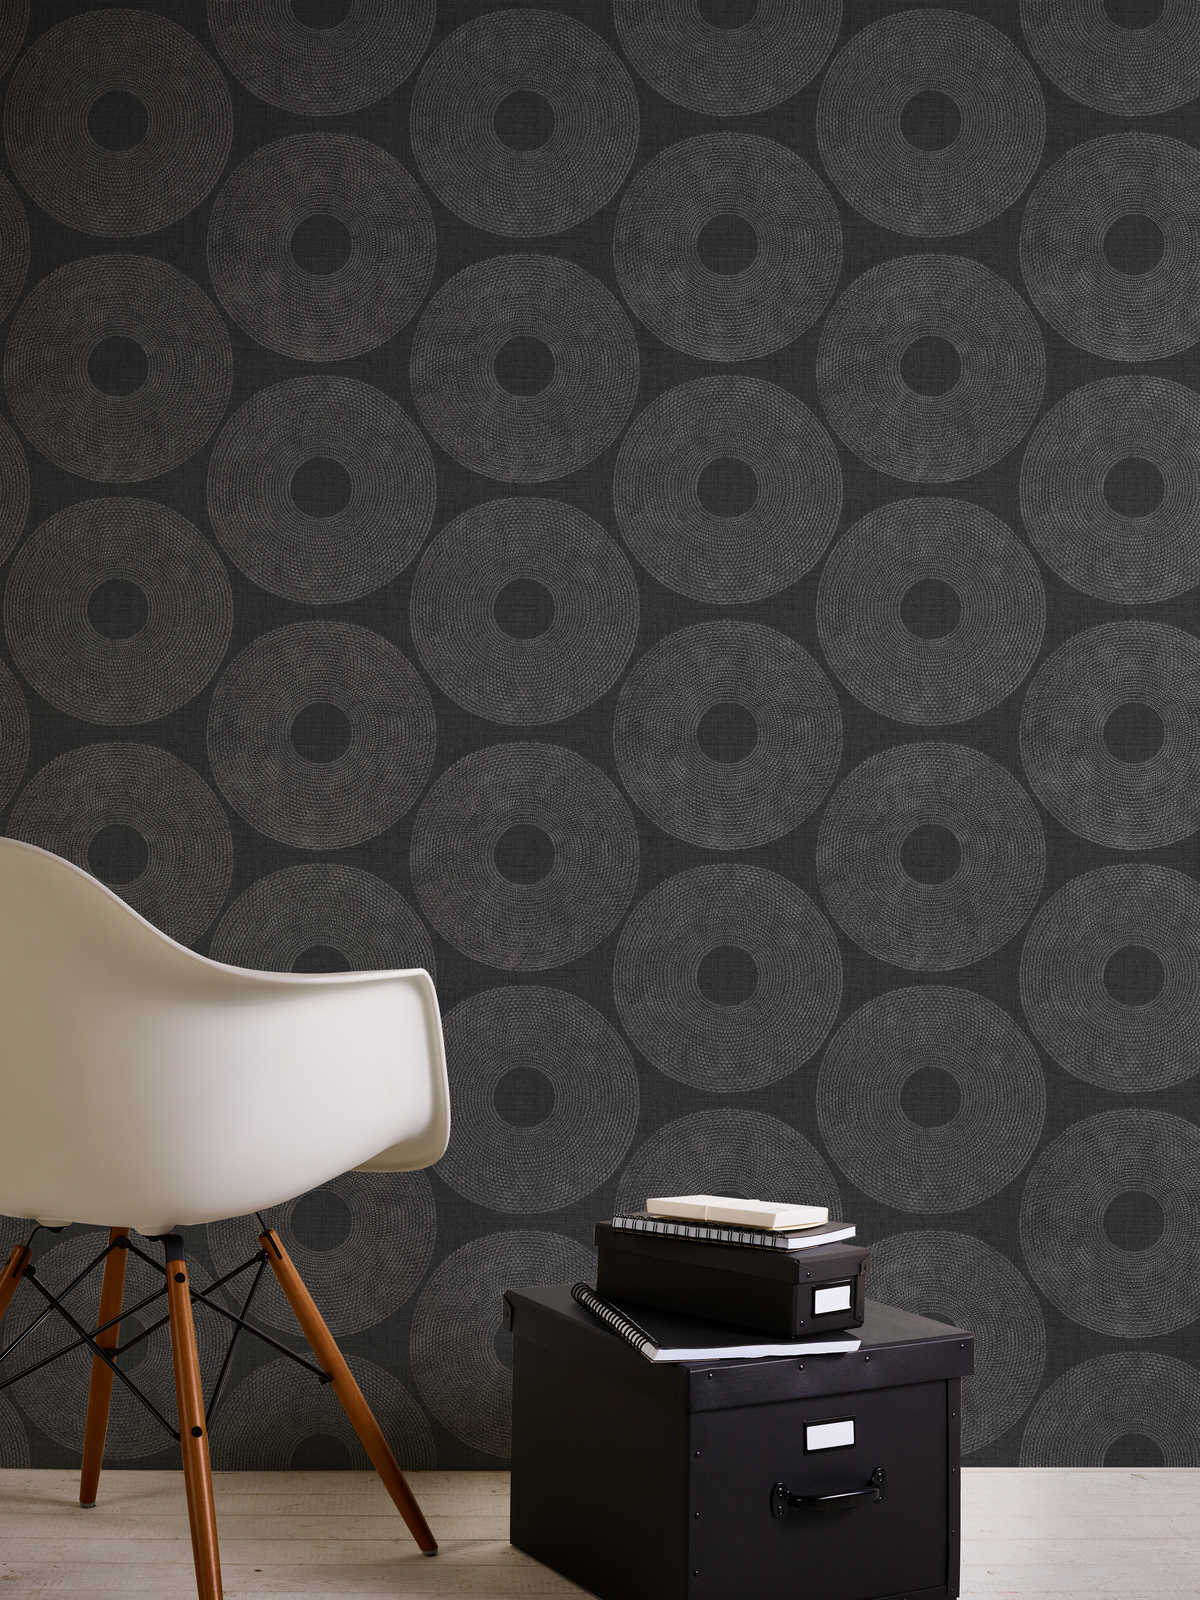             Ethno wallpaper circles with structure design - grey, metallic
        